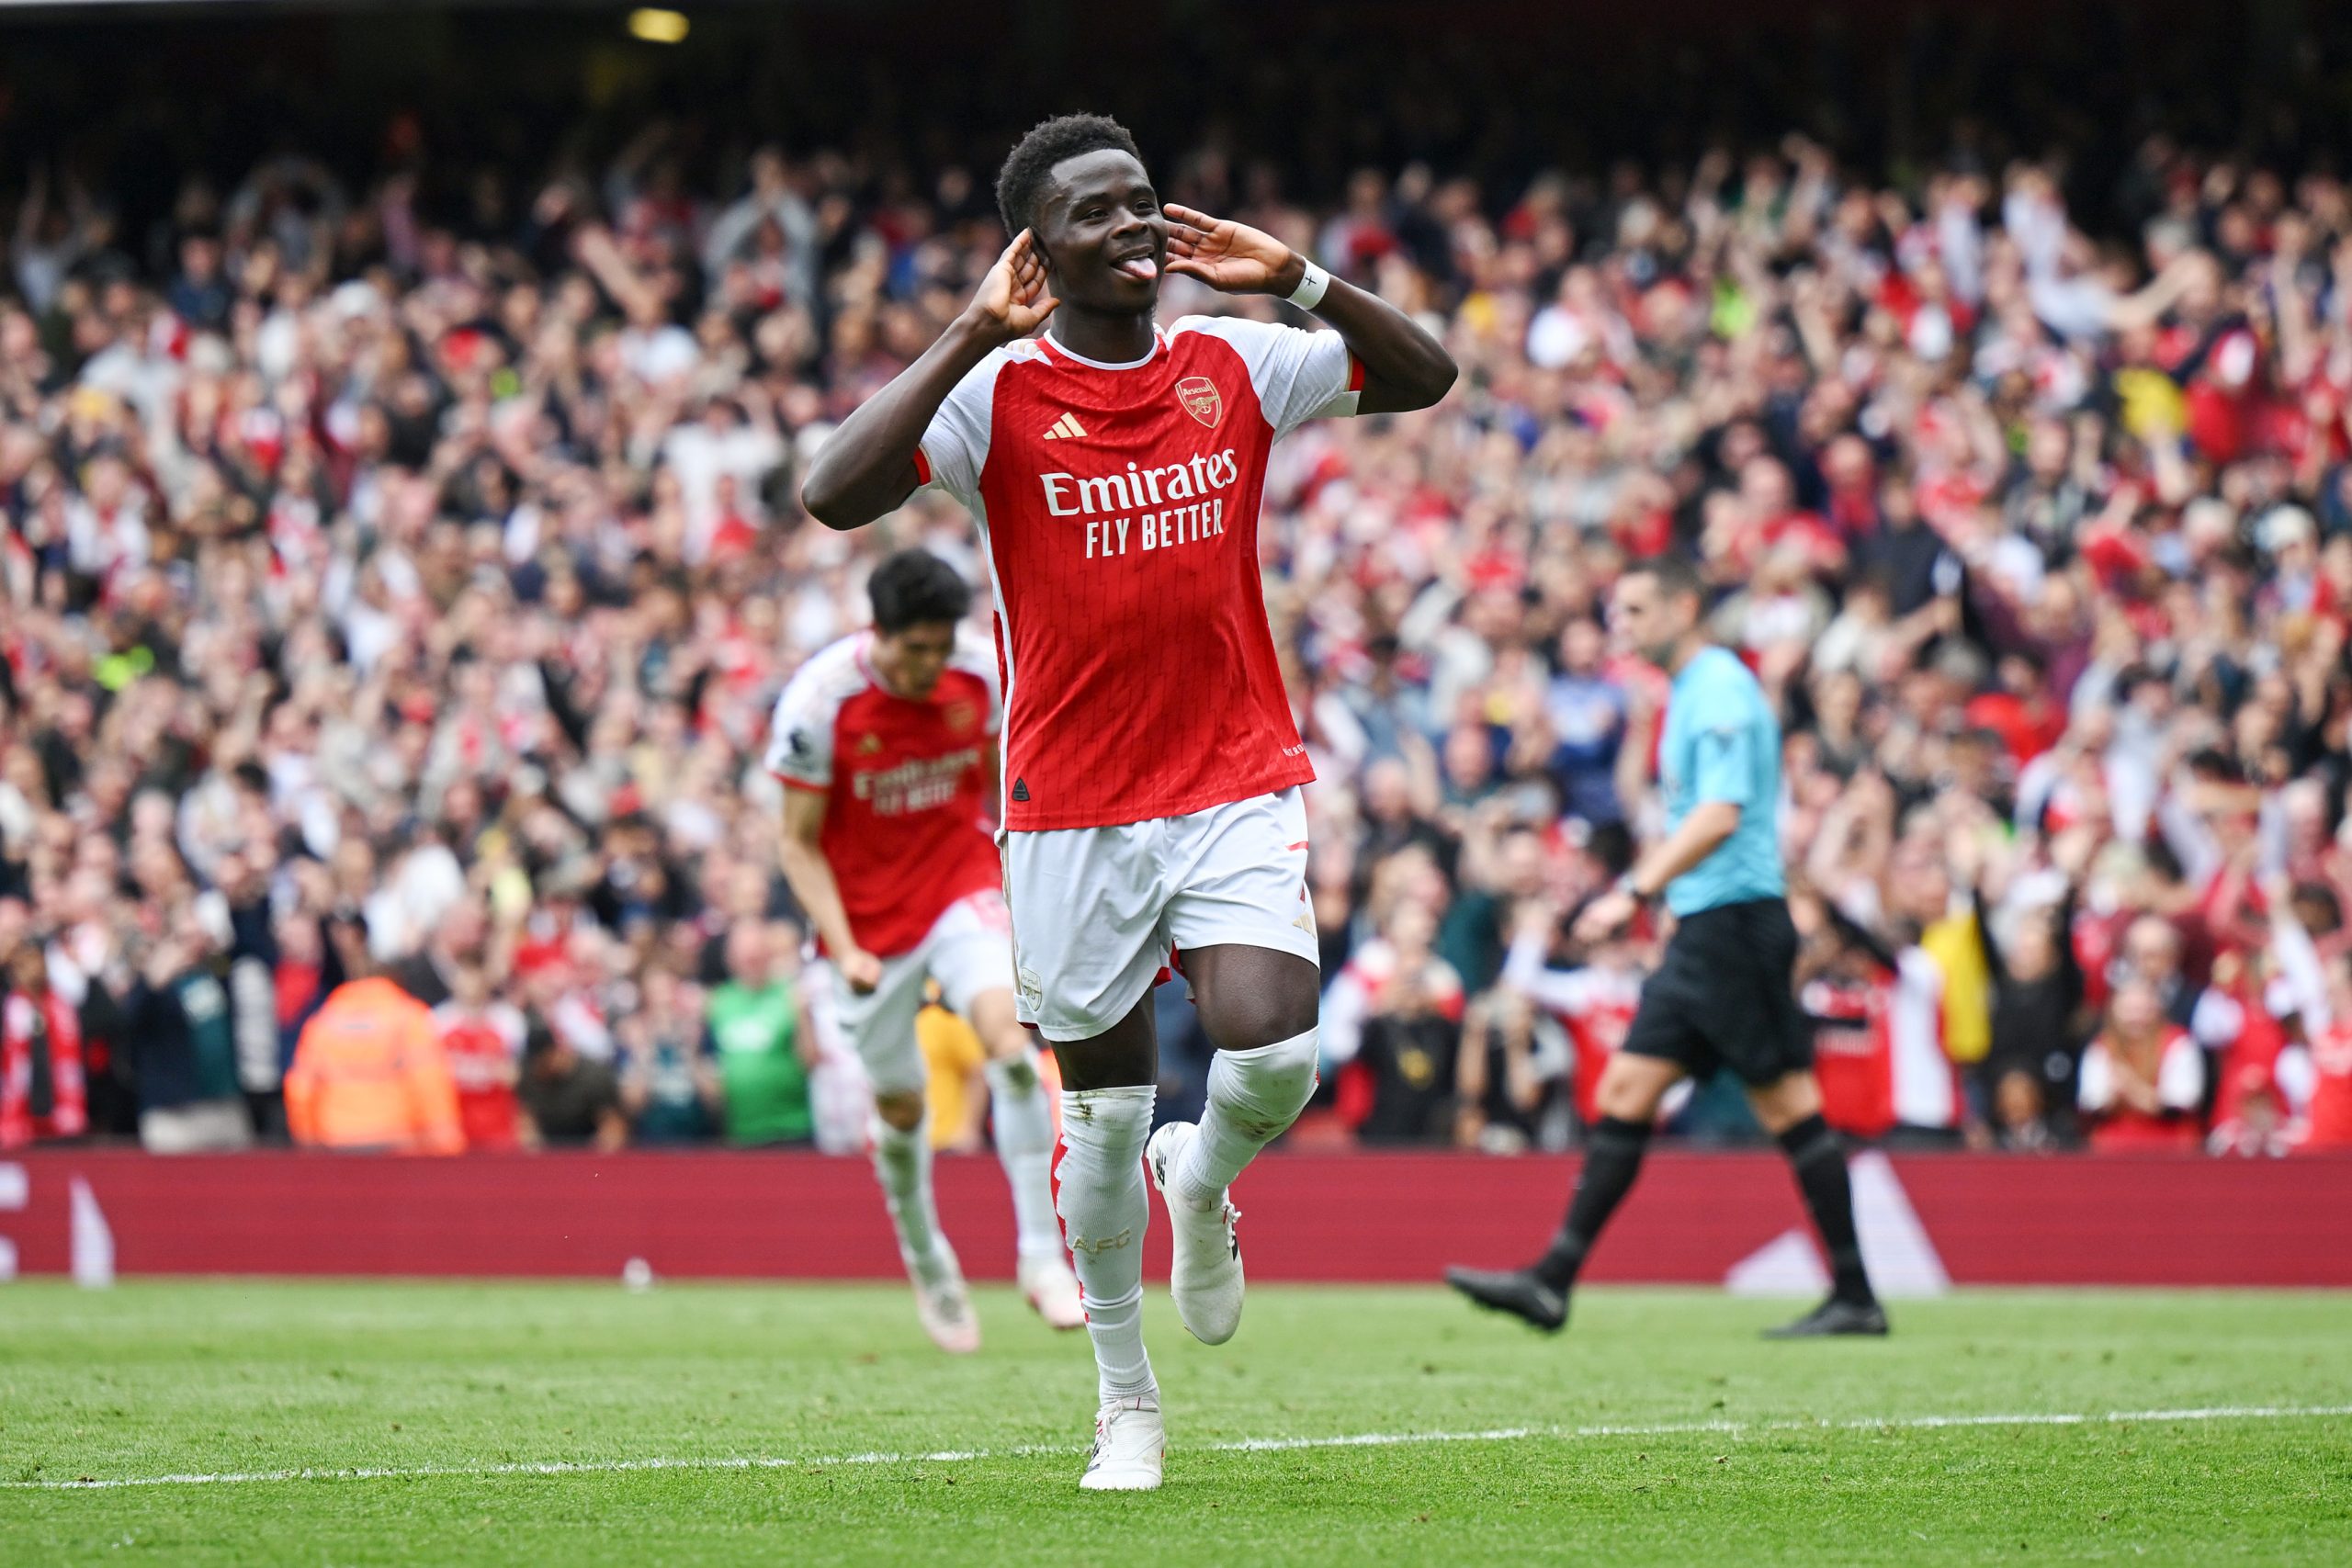 Arsenal keeps top spot in EPL, scoring three goals past Bournemouth 1